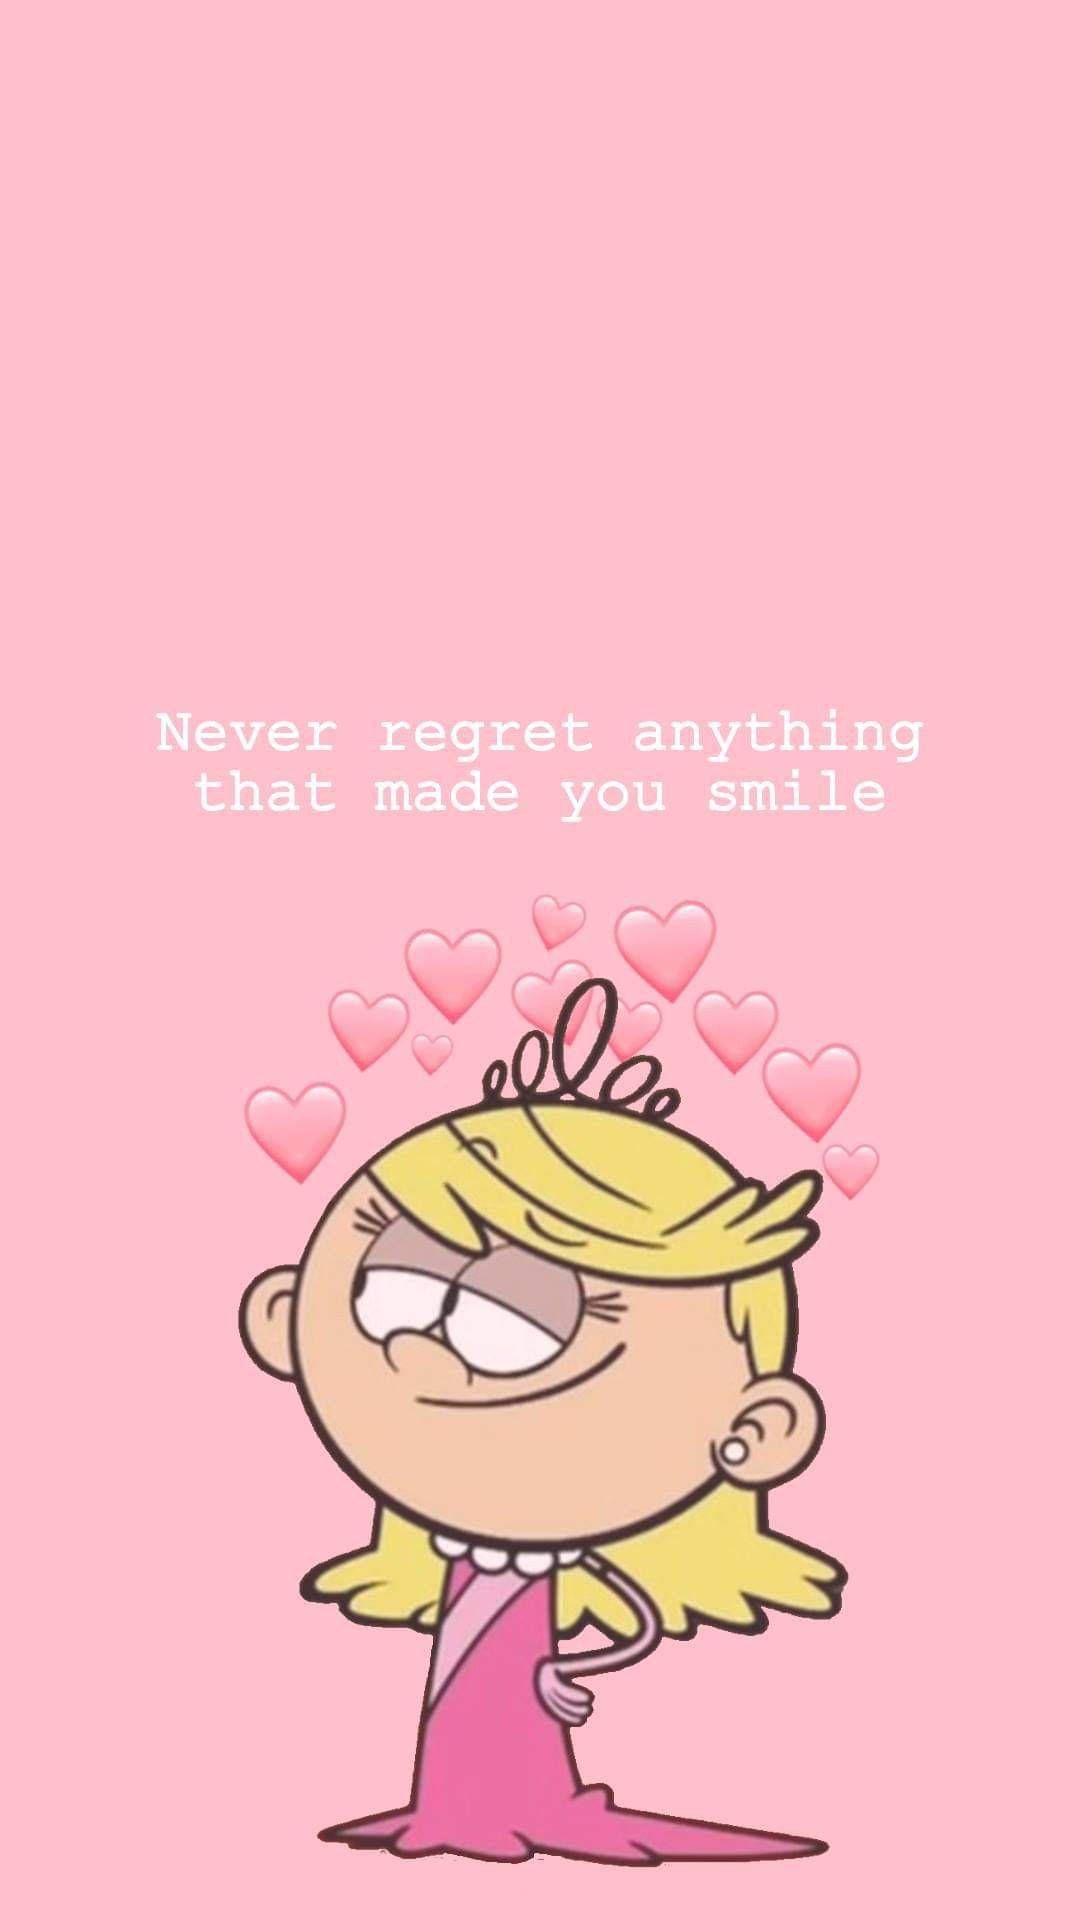 Never regret anything that made you smile  - Smile